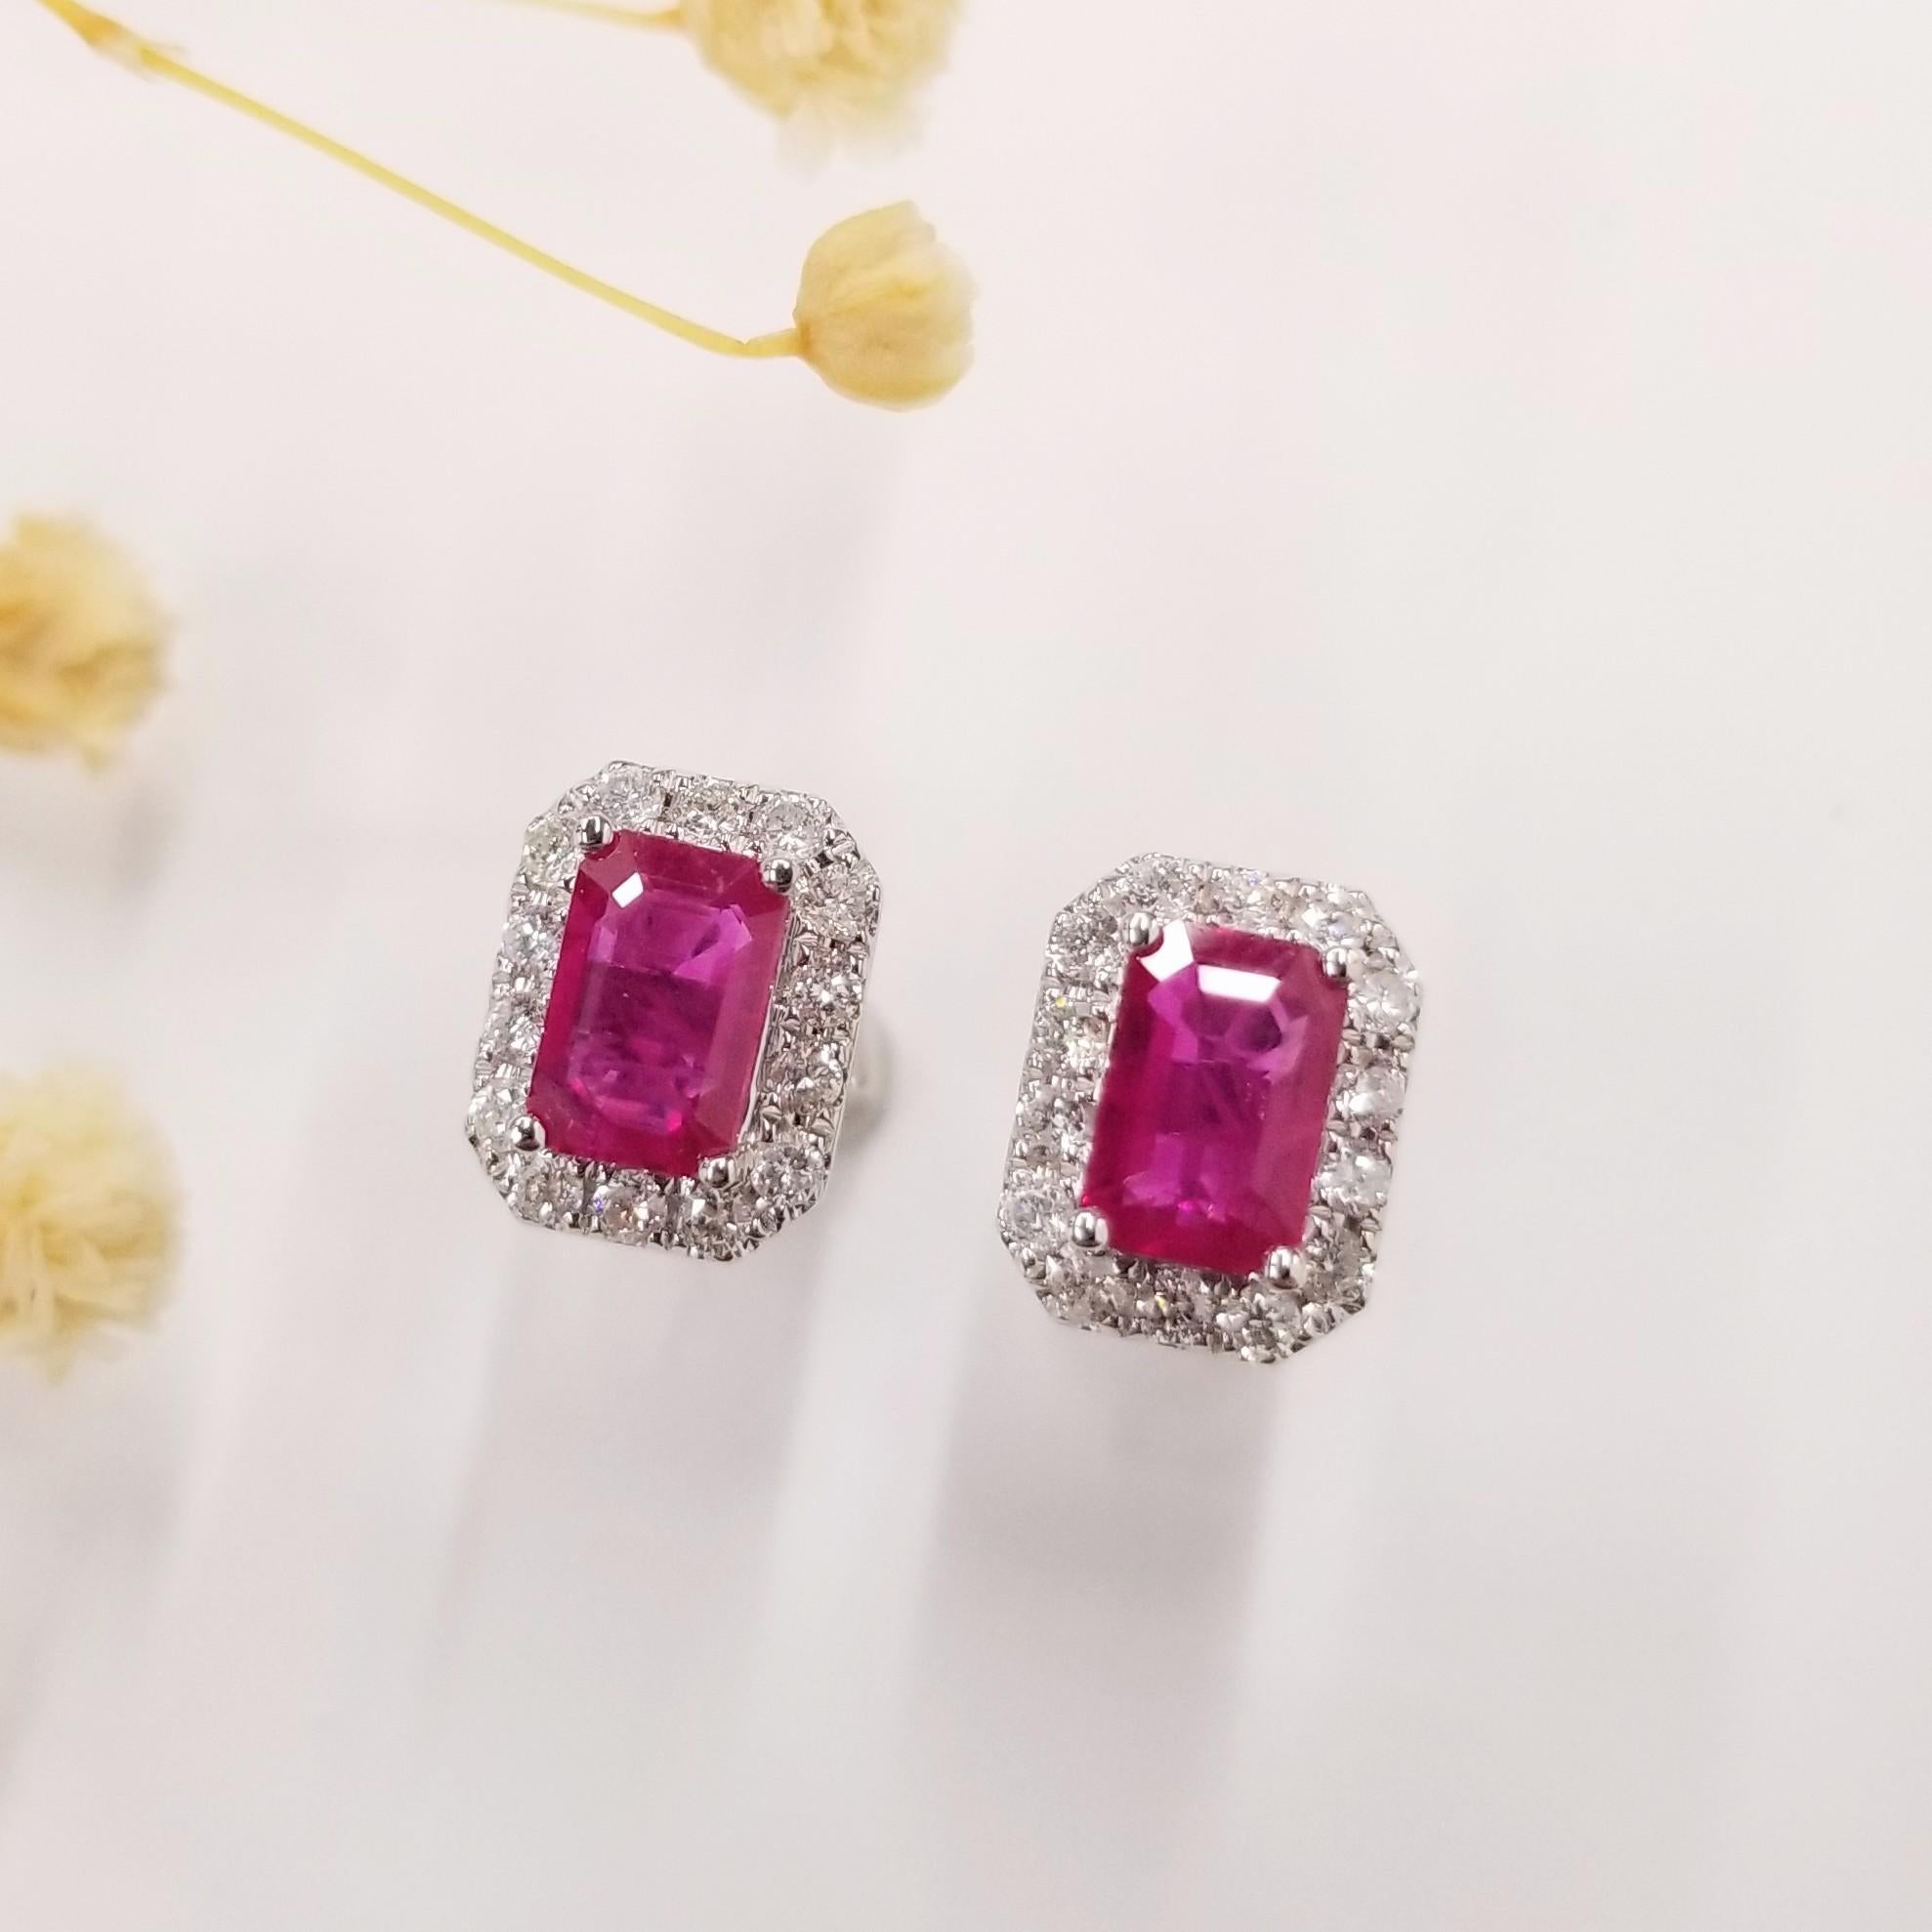 Securing a matched pair of natural rubies in the distinctive emerald shape for earrings can be a tremendous challenge. However, these earrings showcase an extraordinary IGI Certified 1.44 Carat Ruby, renowned for its superb quality and originating